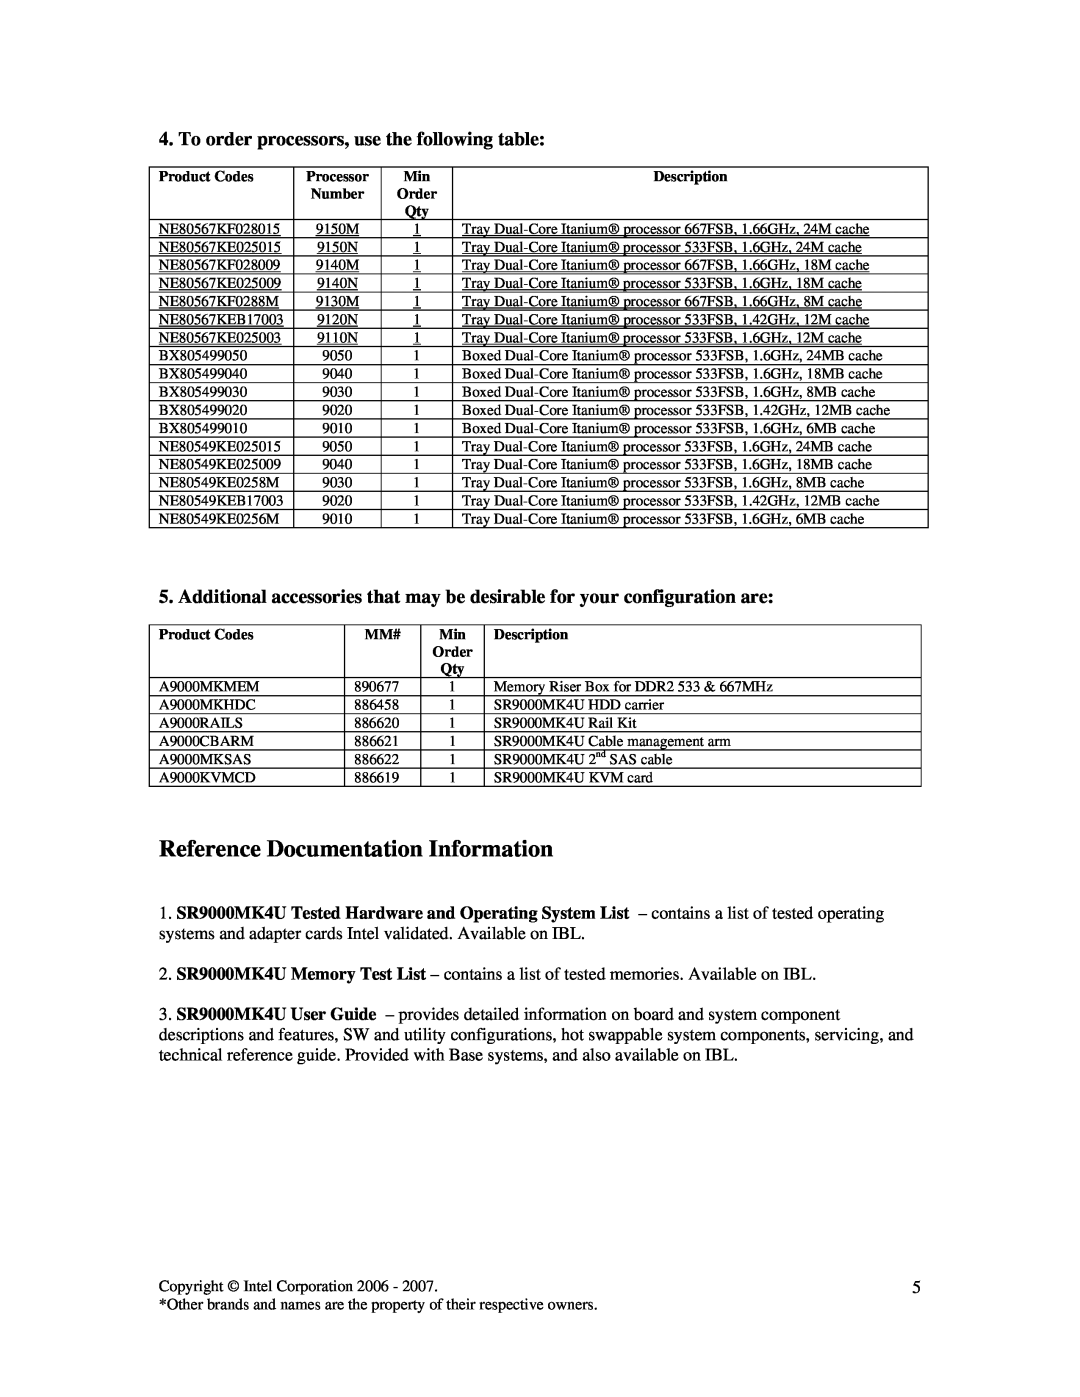 Intel SR9000MK4U warranty Reference Documentation Information, To order processors, use the following table 